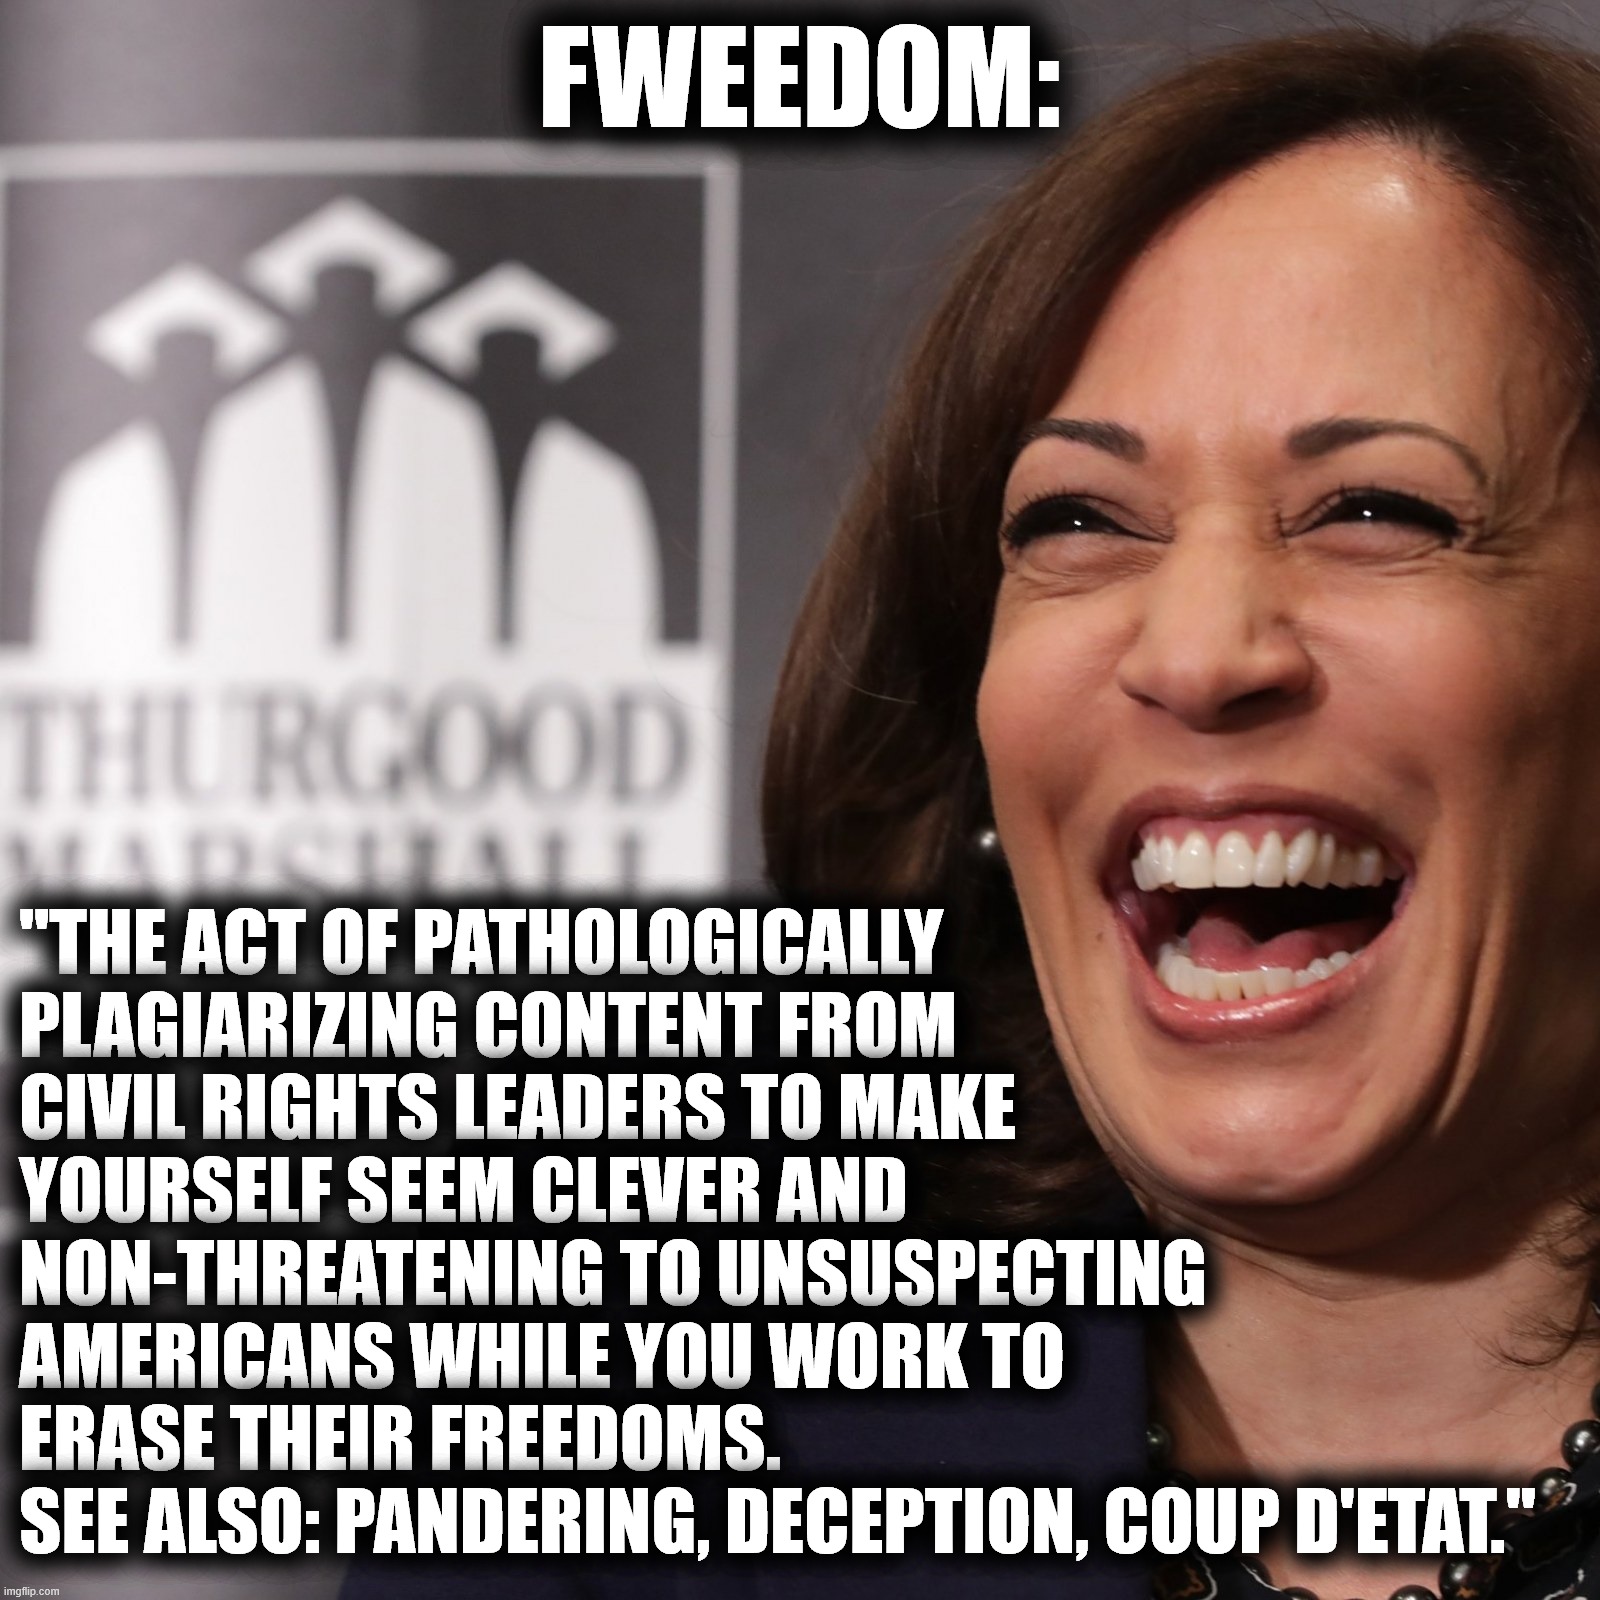 Fweedom |  FWEEDOM:; "THE ACT OF PATHOLOGICALLY PLAGIARIZING CONTENT FROM CIVIL RIGHTS LEADERS TO MAKE YOURSELF SEEM CLEVER AND NON-THREATENING TO UNSUSPECTING AMERICANS WHILE YOU WORK TO ERASE THEIR FREEDOMS. SEE ALSO: PANDERING, DECEPTION, COUP D'ETAT." | image tagged in freedom,fweedom,kamala harris,dumbass | made w/ Imgflip meme maker